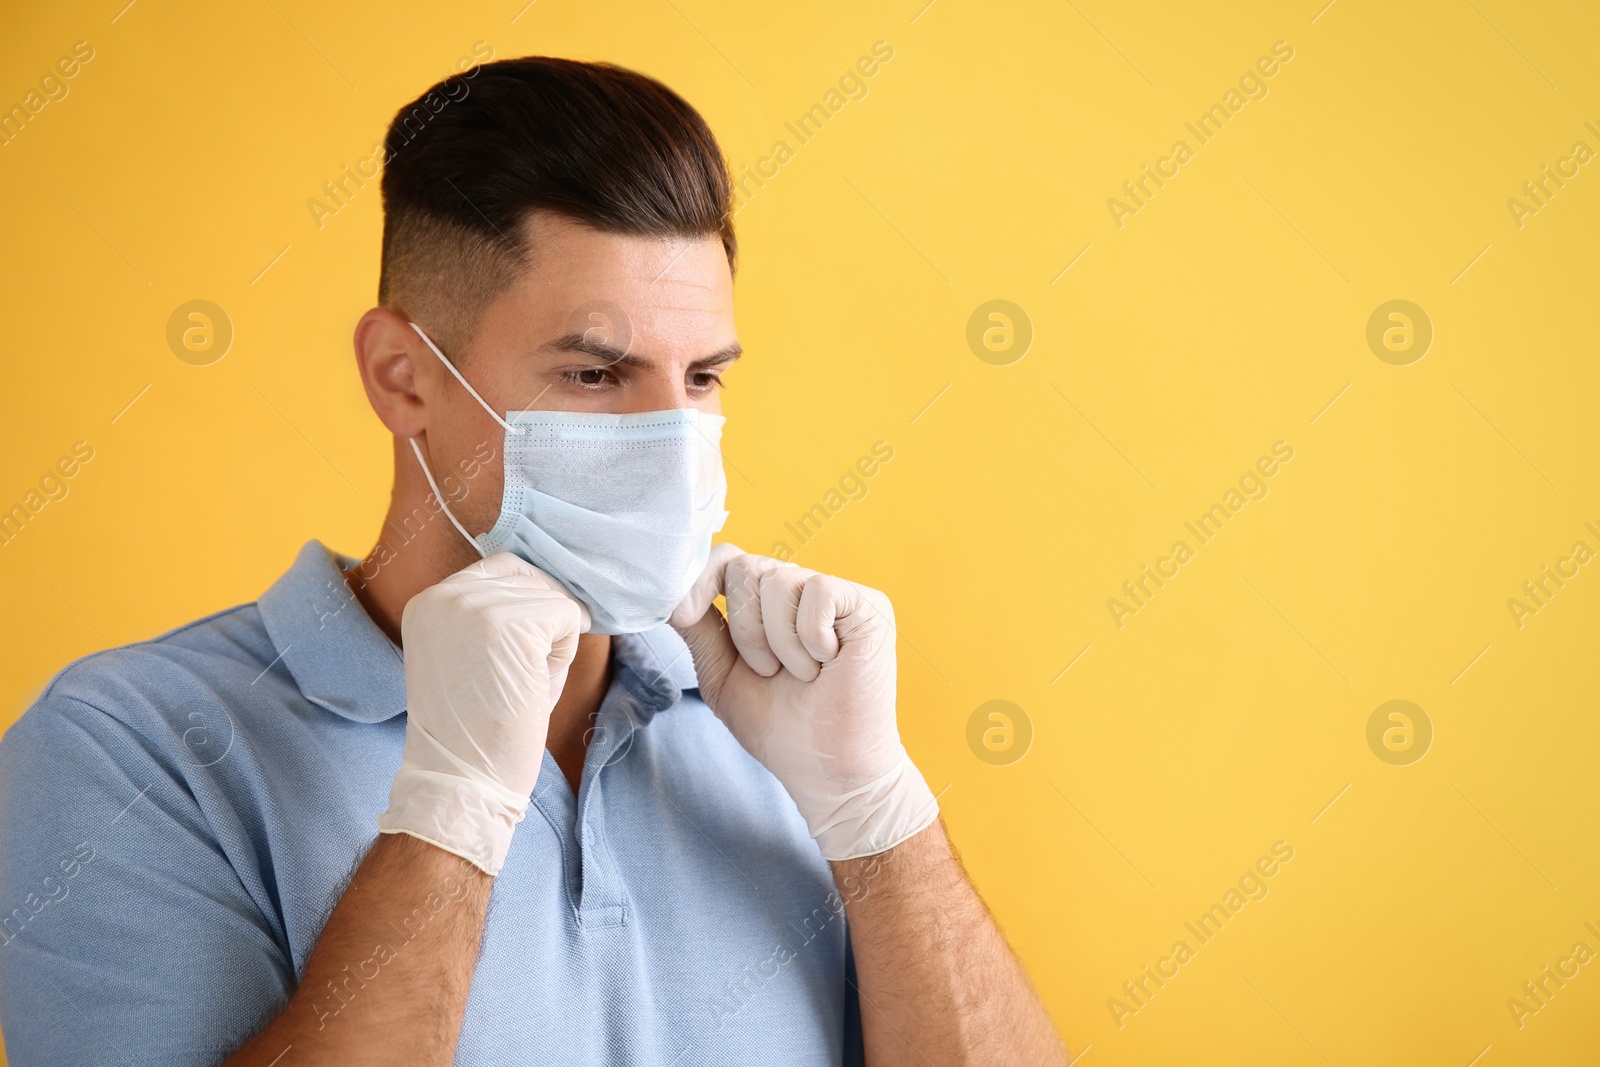 Photo of Man in medical gloves putting on protective face mask against yellow background. Space for text